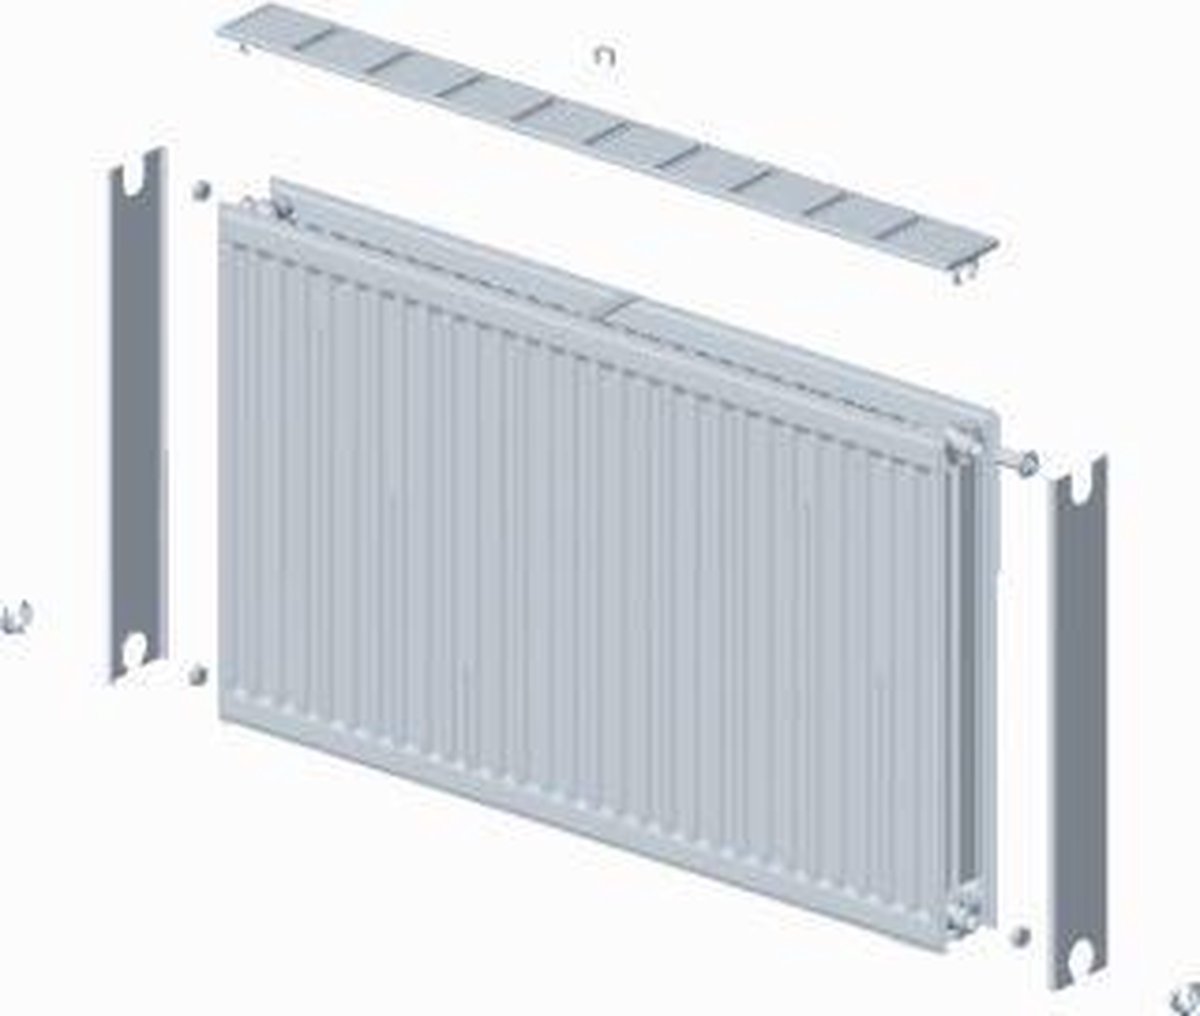 Stelrad paneelradiator Novello, staal, wit, (hxlxd) 300x2800x100mm, 22